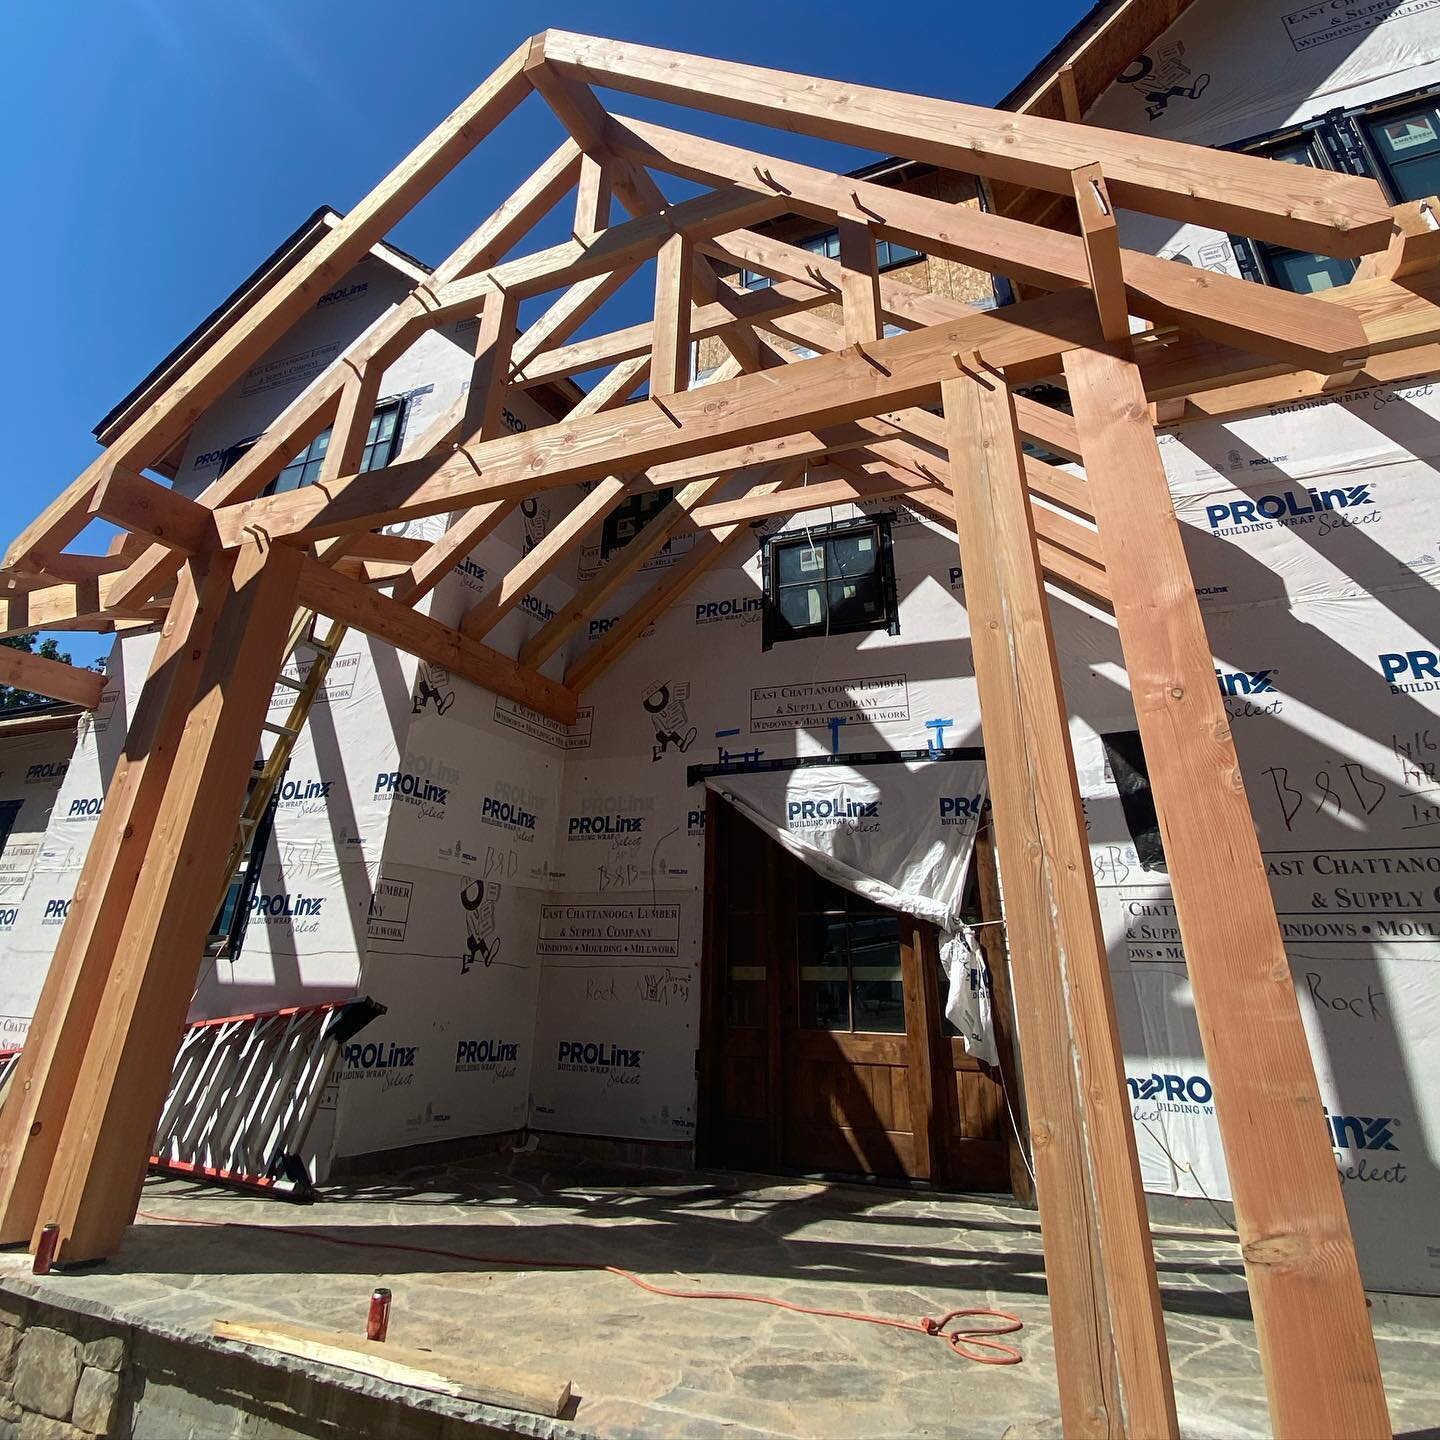 These custom pine Timbers are worth the wait! The craftsmanship and detail that goes into the design of these porches is unreal! We have a real life game of Lincoln logs going. Can&rsquo;t wait to see it completed! 
#signalmountaintn #customhomes #ch